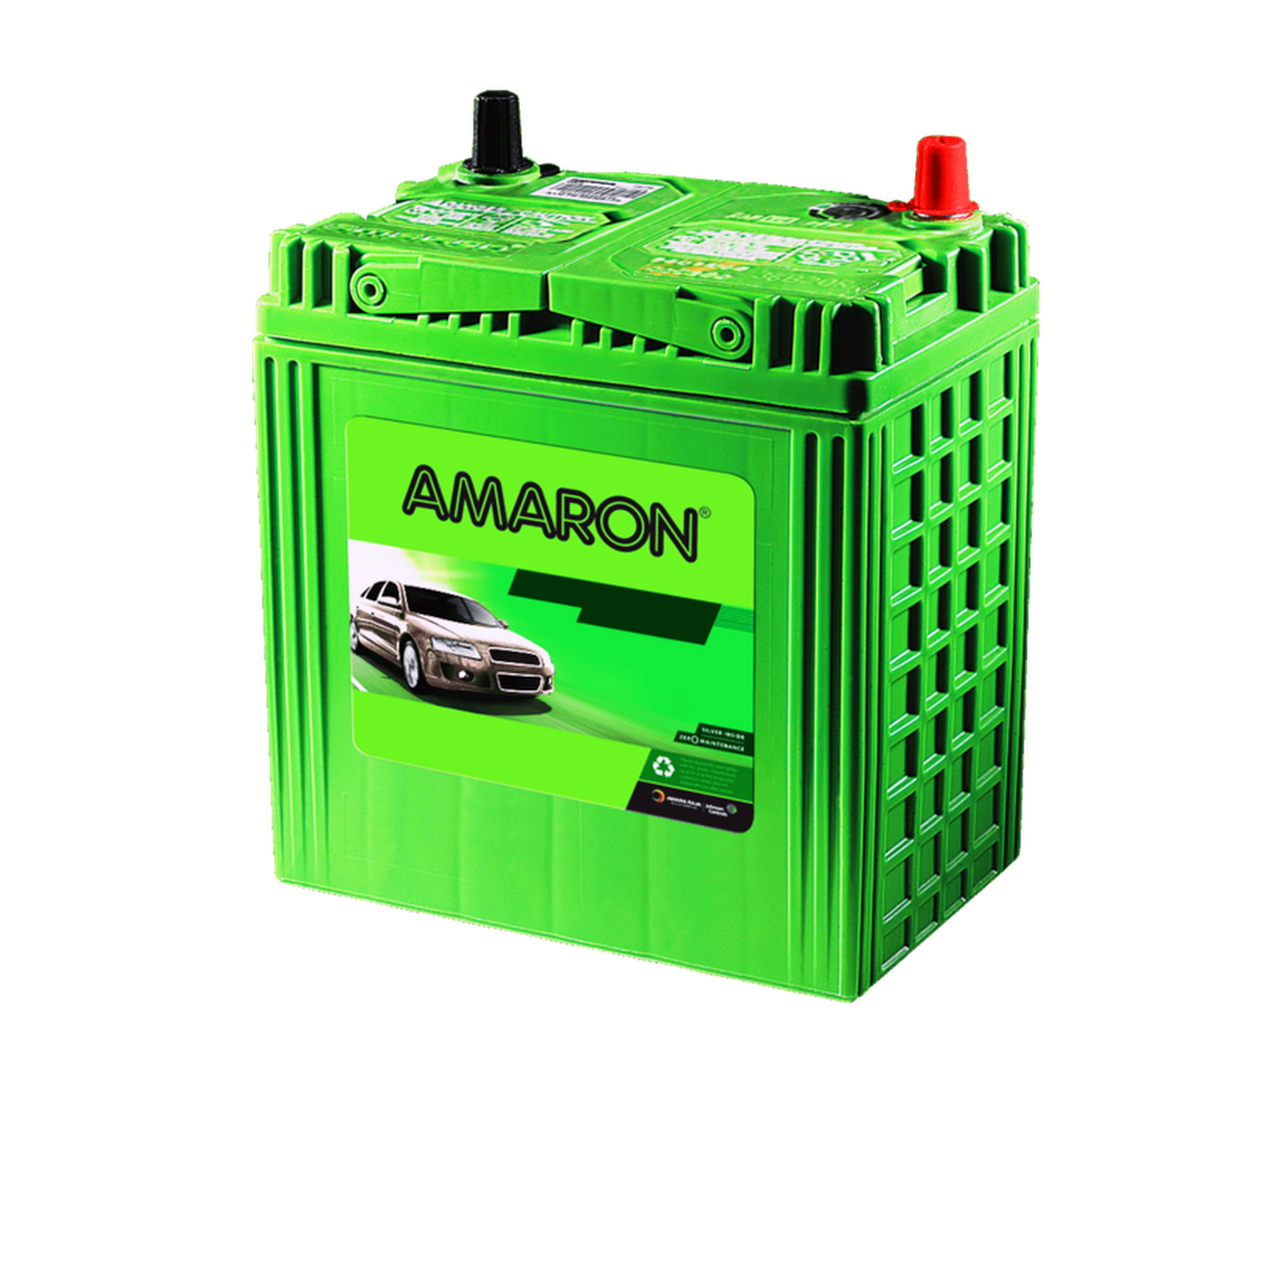 Tata Telcoline Amaron Battery Product for Quote